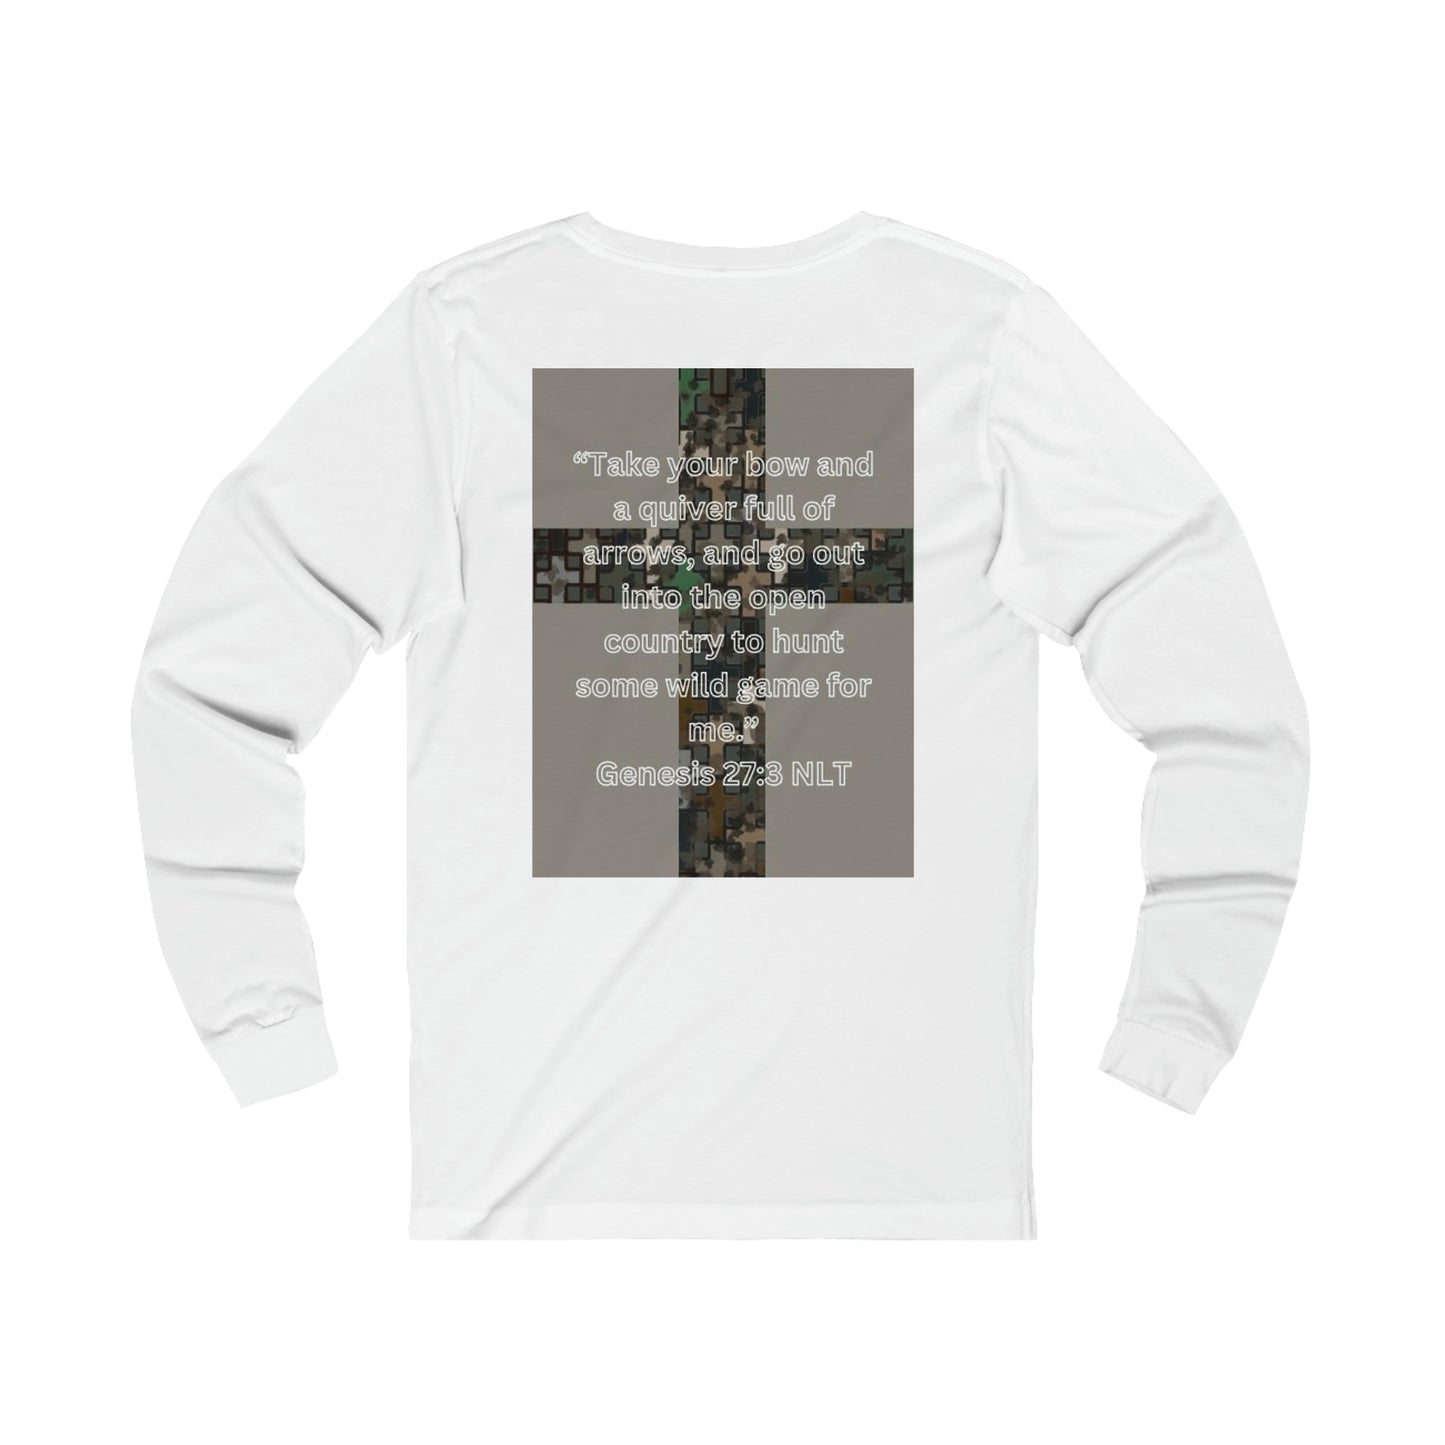 Humbled Encounters Jersey Long Sleeve T-shirt.